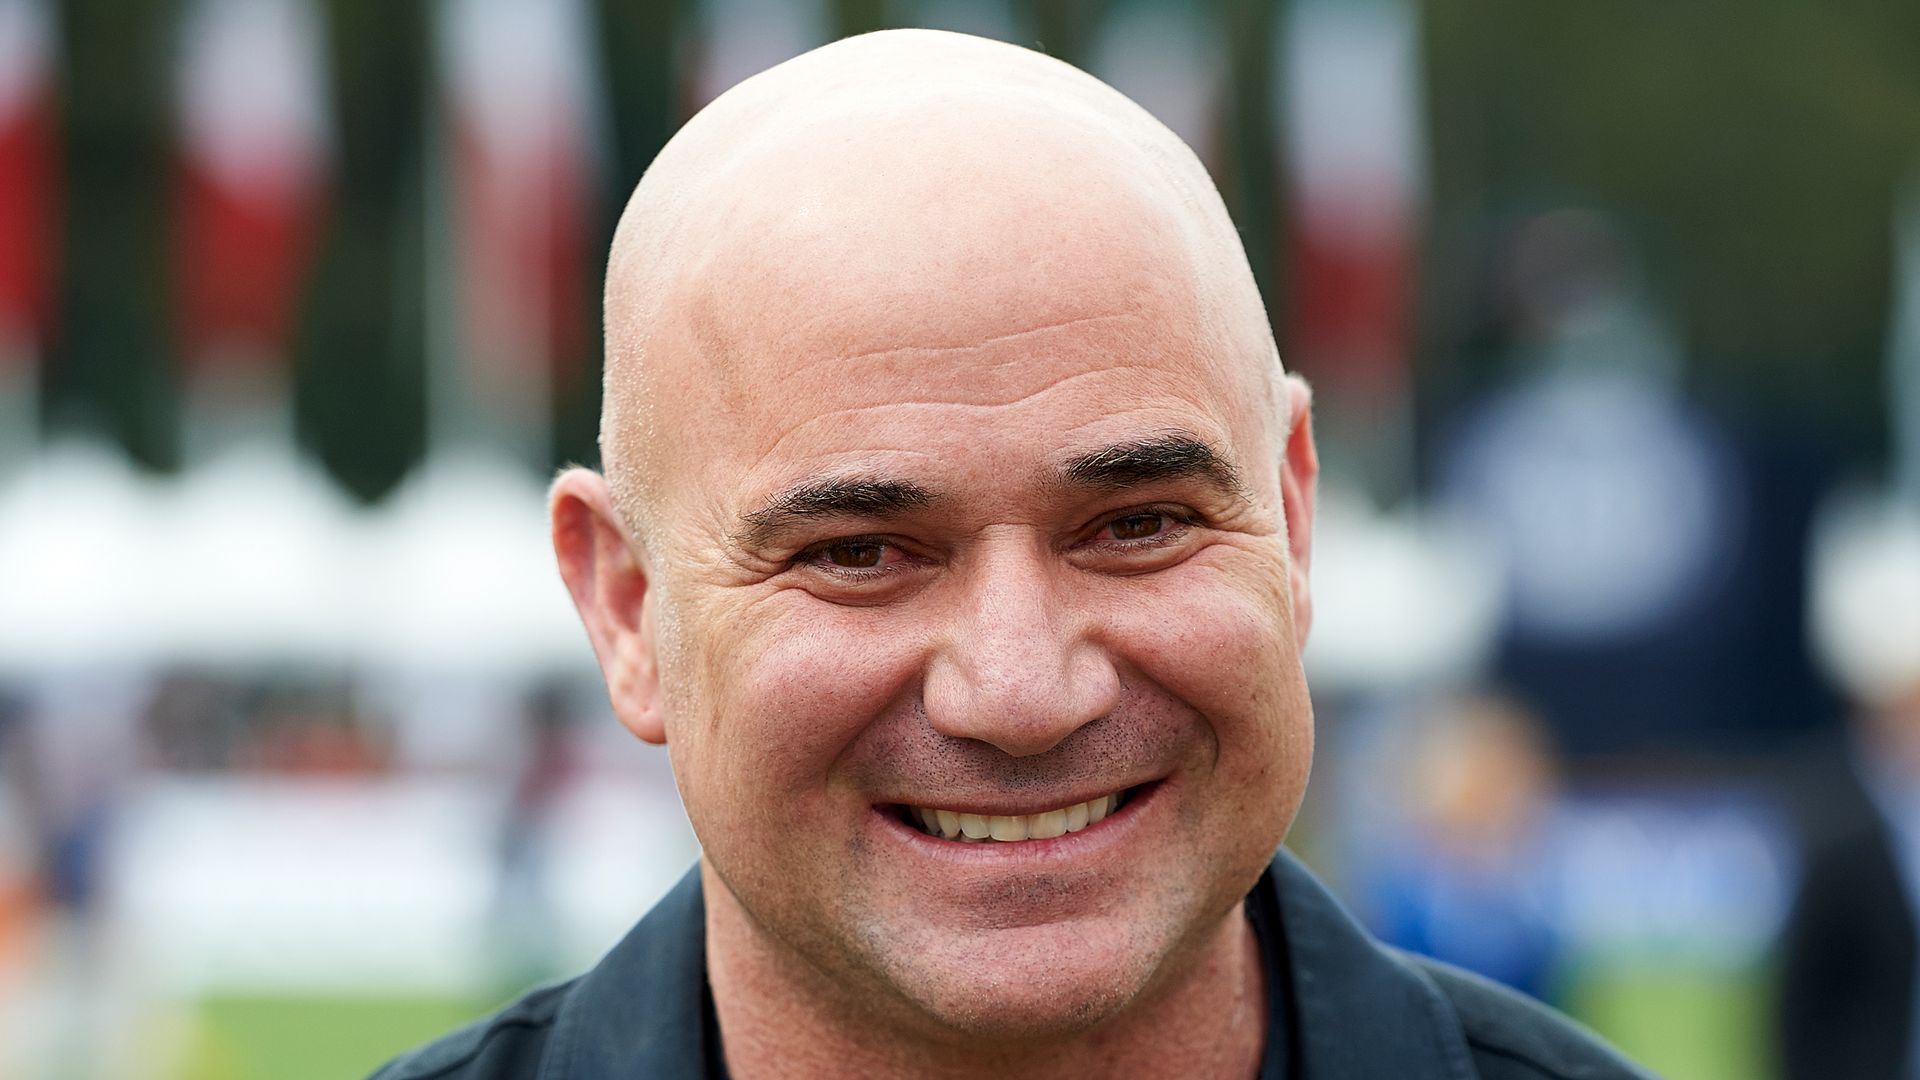 Andre Agassi - Biography